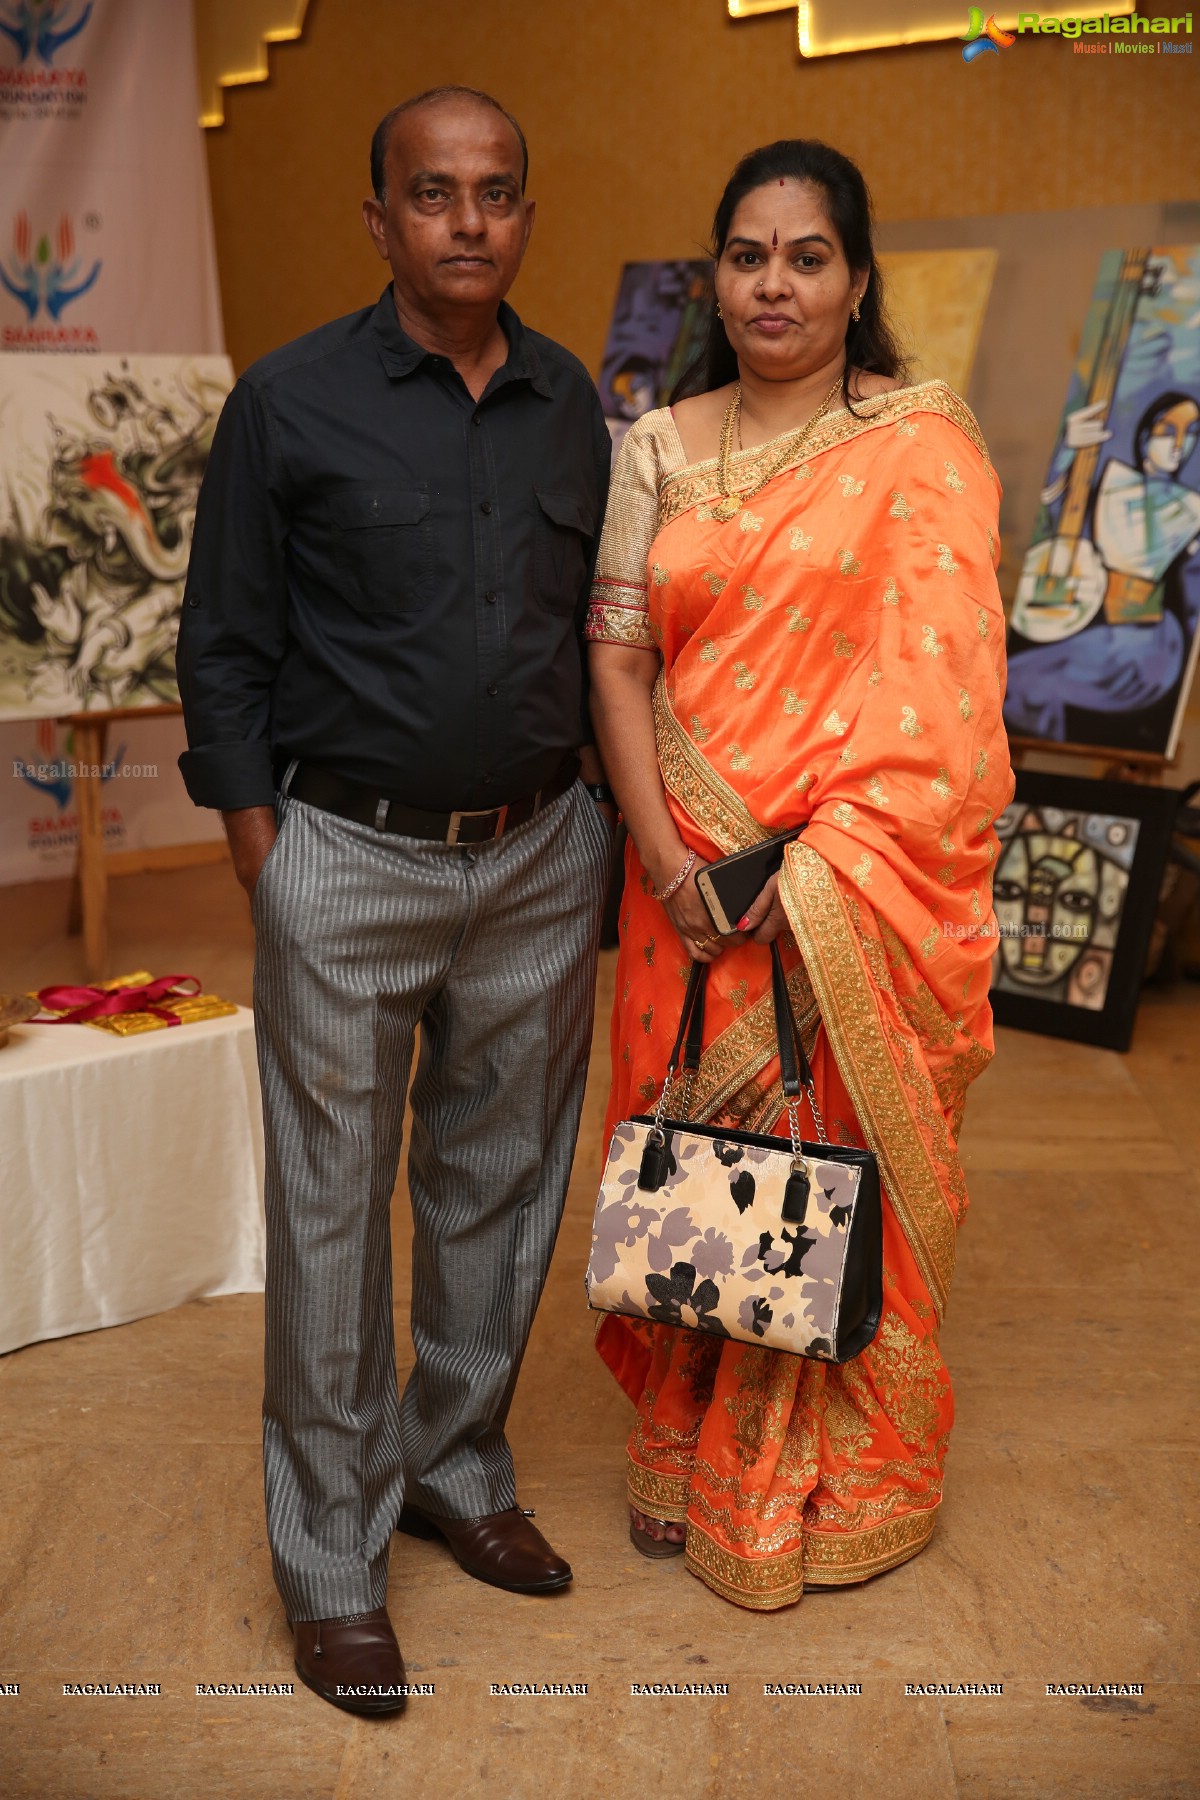 Perseverance - A Charity Art Show - 75th Solo Exhibition Of Paintings By Hari